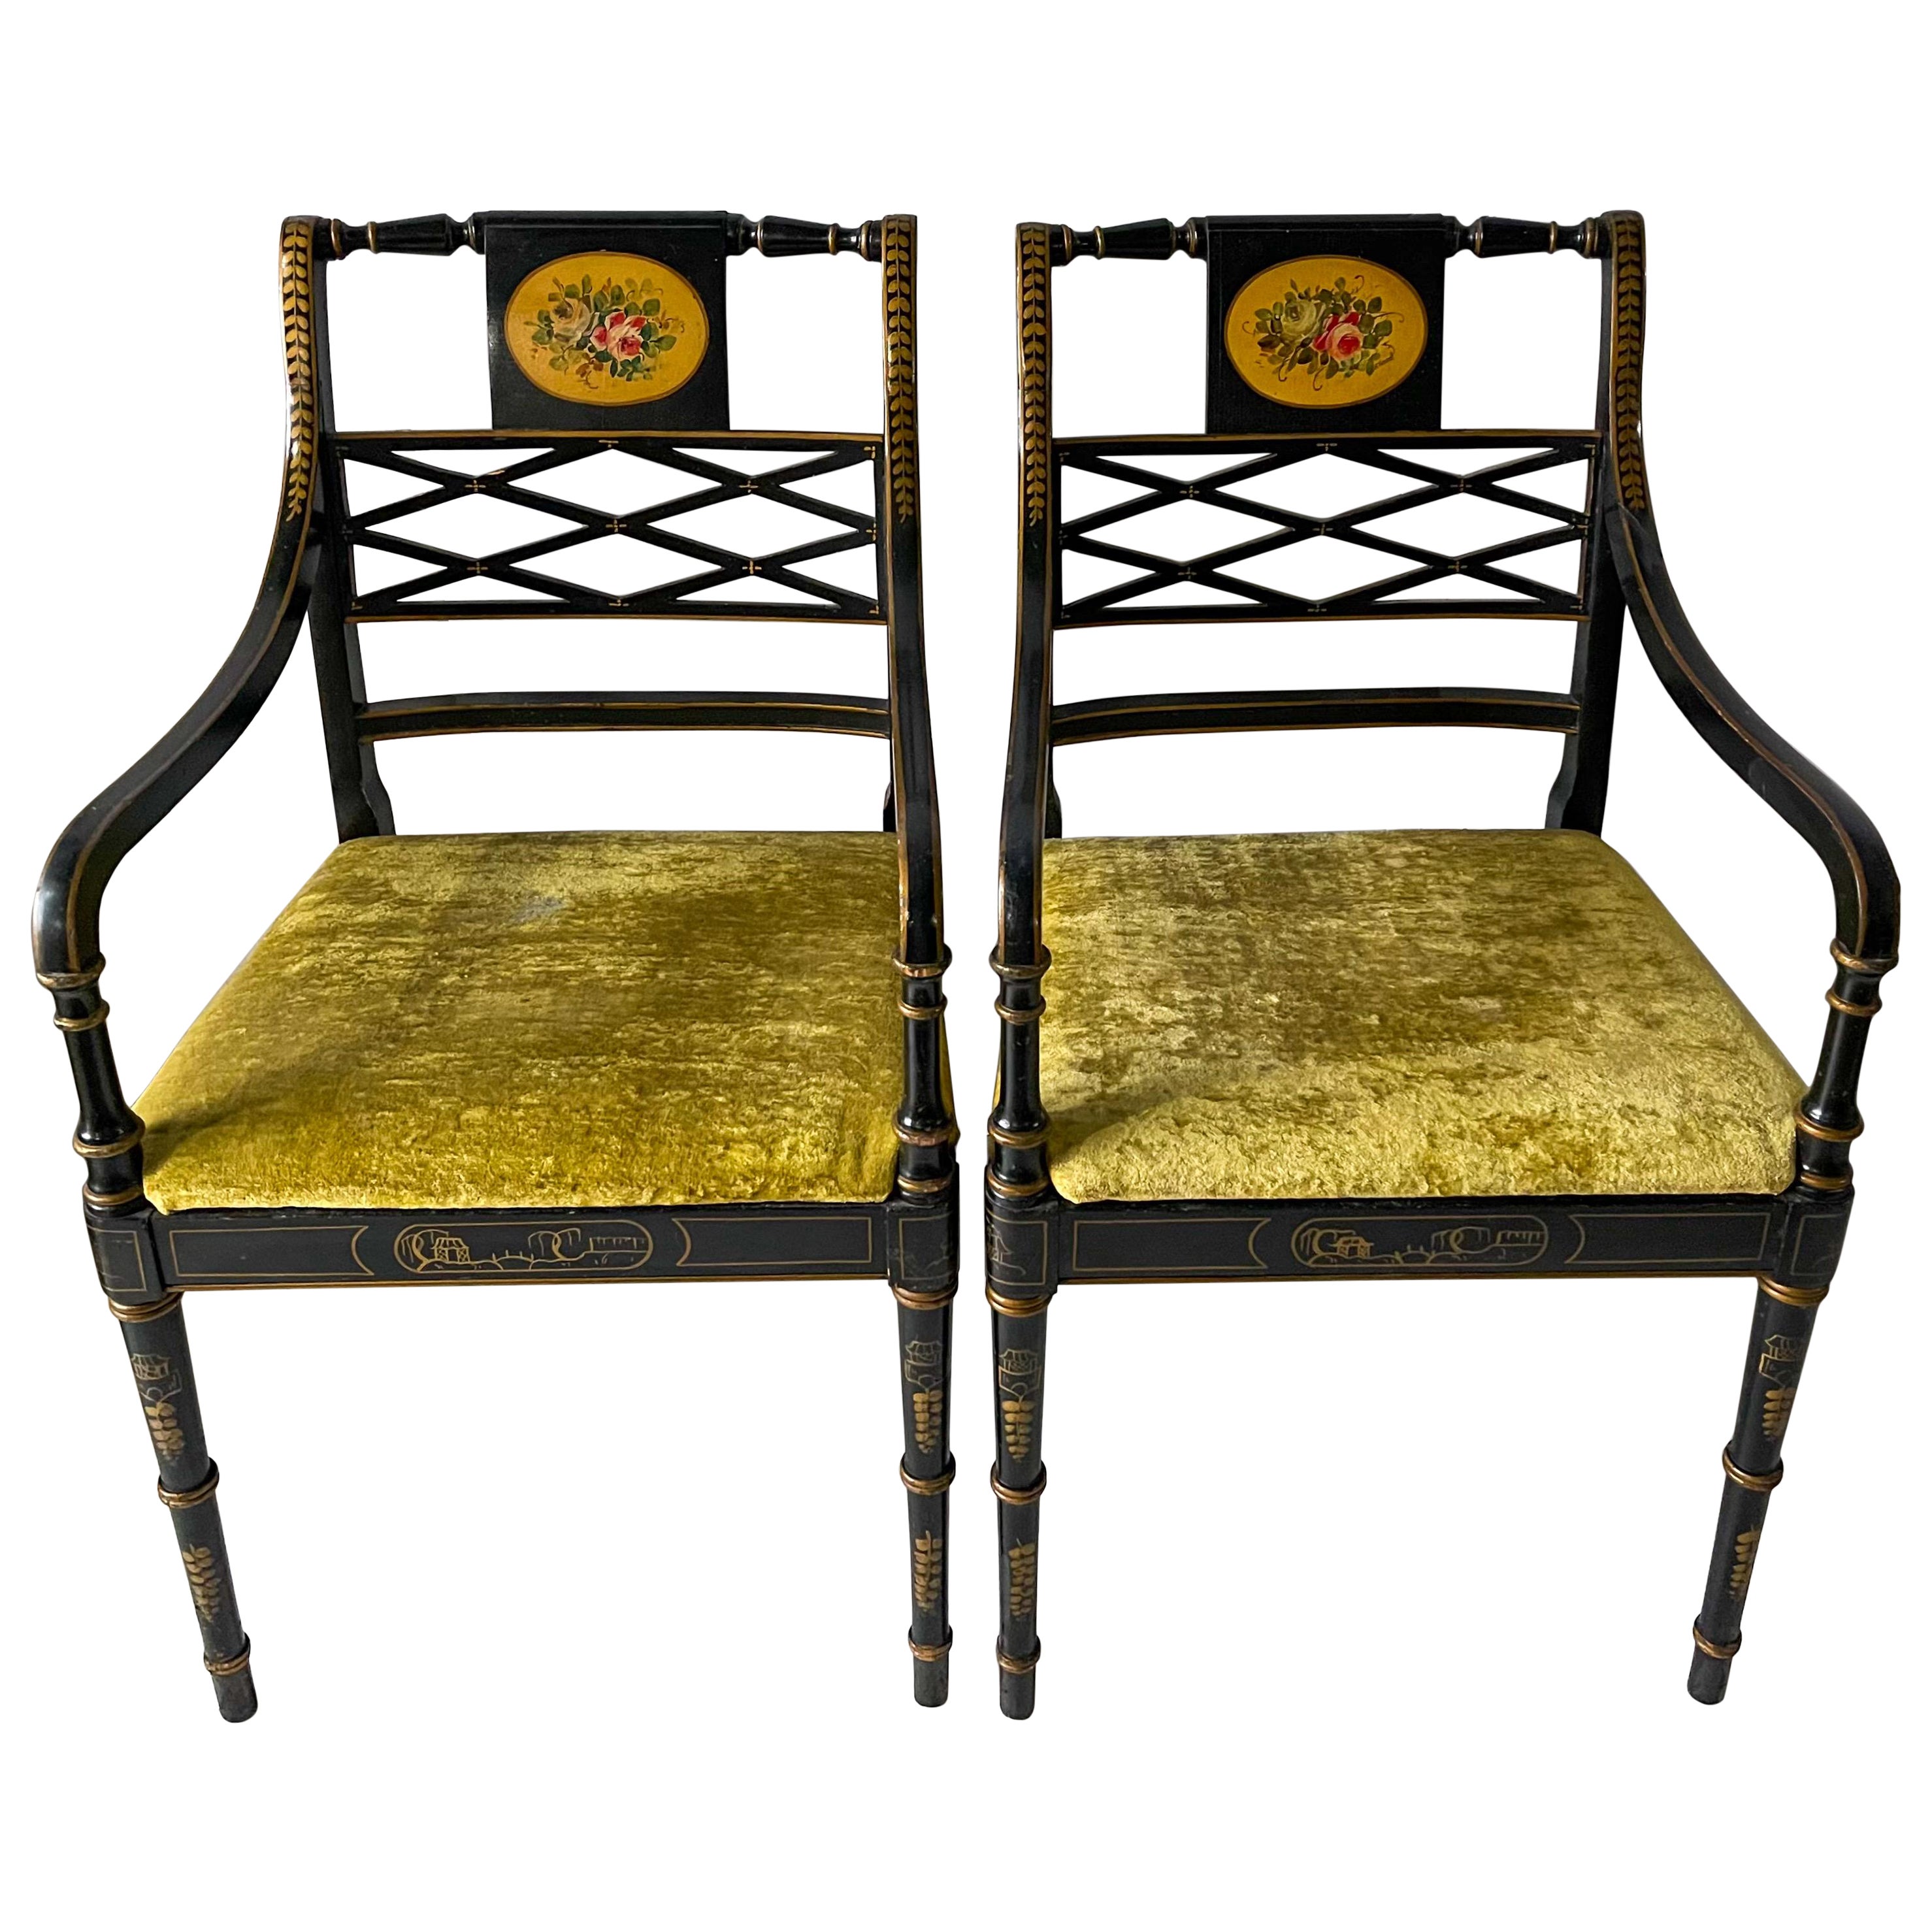 Regency Style Painted Black Lacquer Chinoiserie Bergere Chairs, Pair For Sale